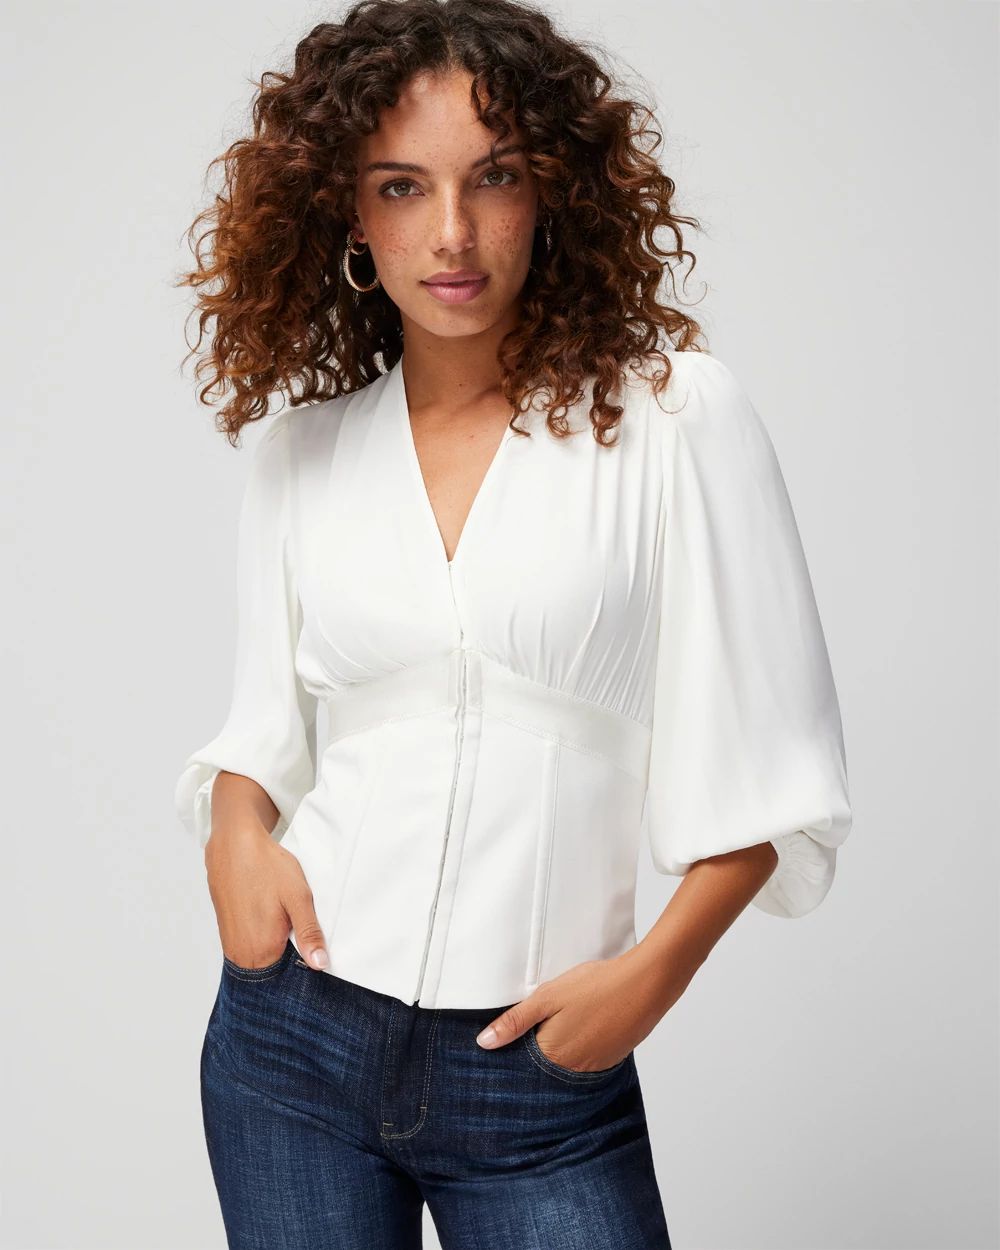 https://www.whitehouseblackmarket.com/_assets/products/content/4zheepdq75/jpeg/WHBM_FAL3_2023_ES%20Corset%20Blouse_570354291_IVO000190_OF_MAIN.jpeg?imwidth=1200&quality=80